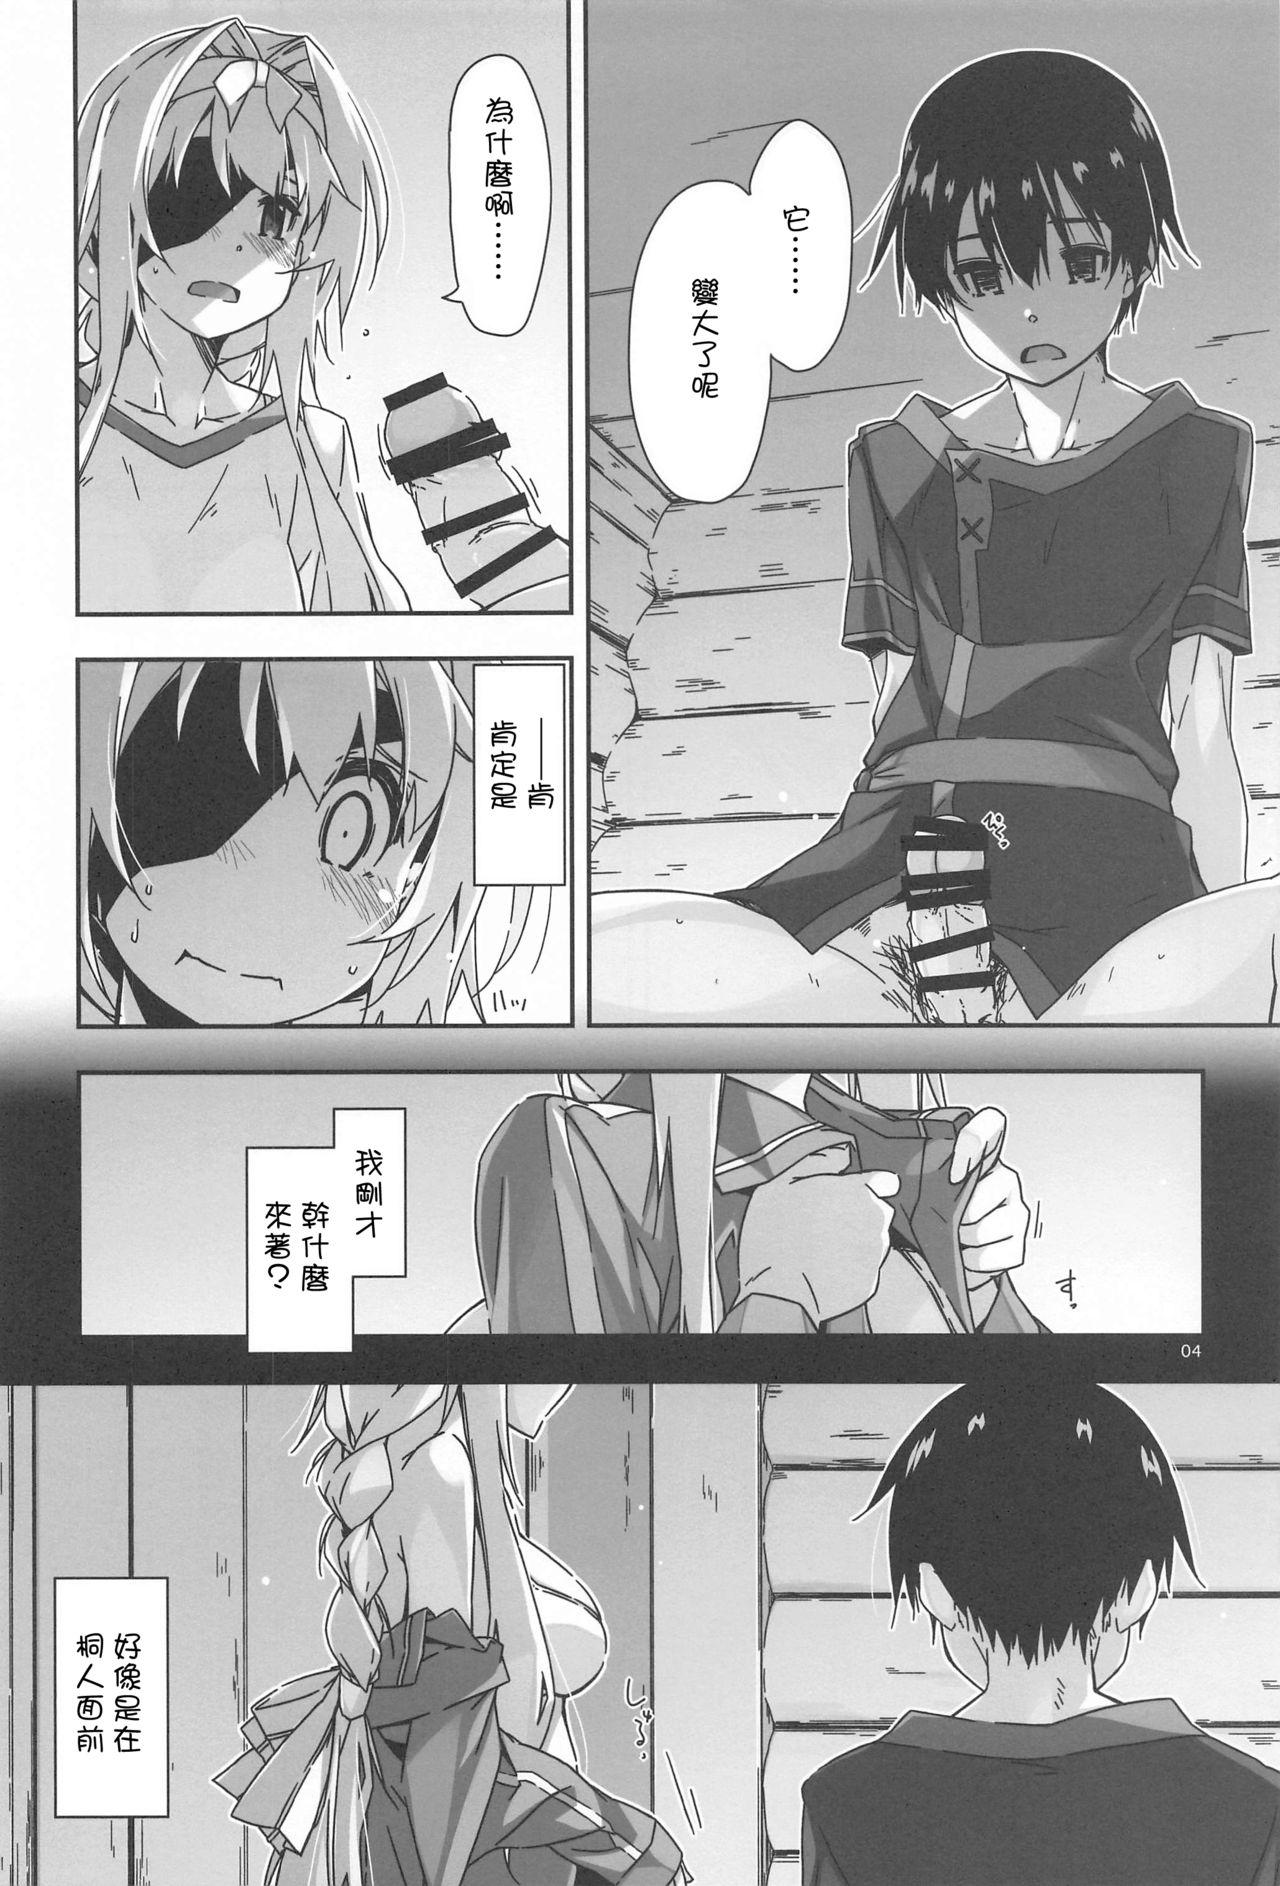 Exposed Alice no Naisho - Sword art online Hairypussy - Page 4